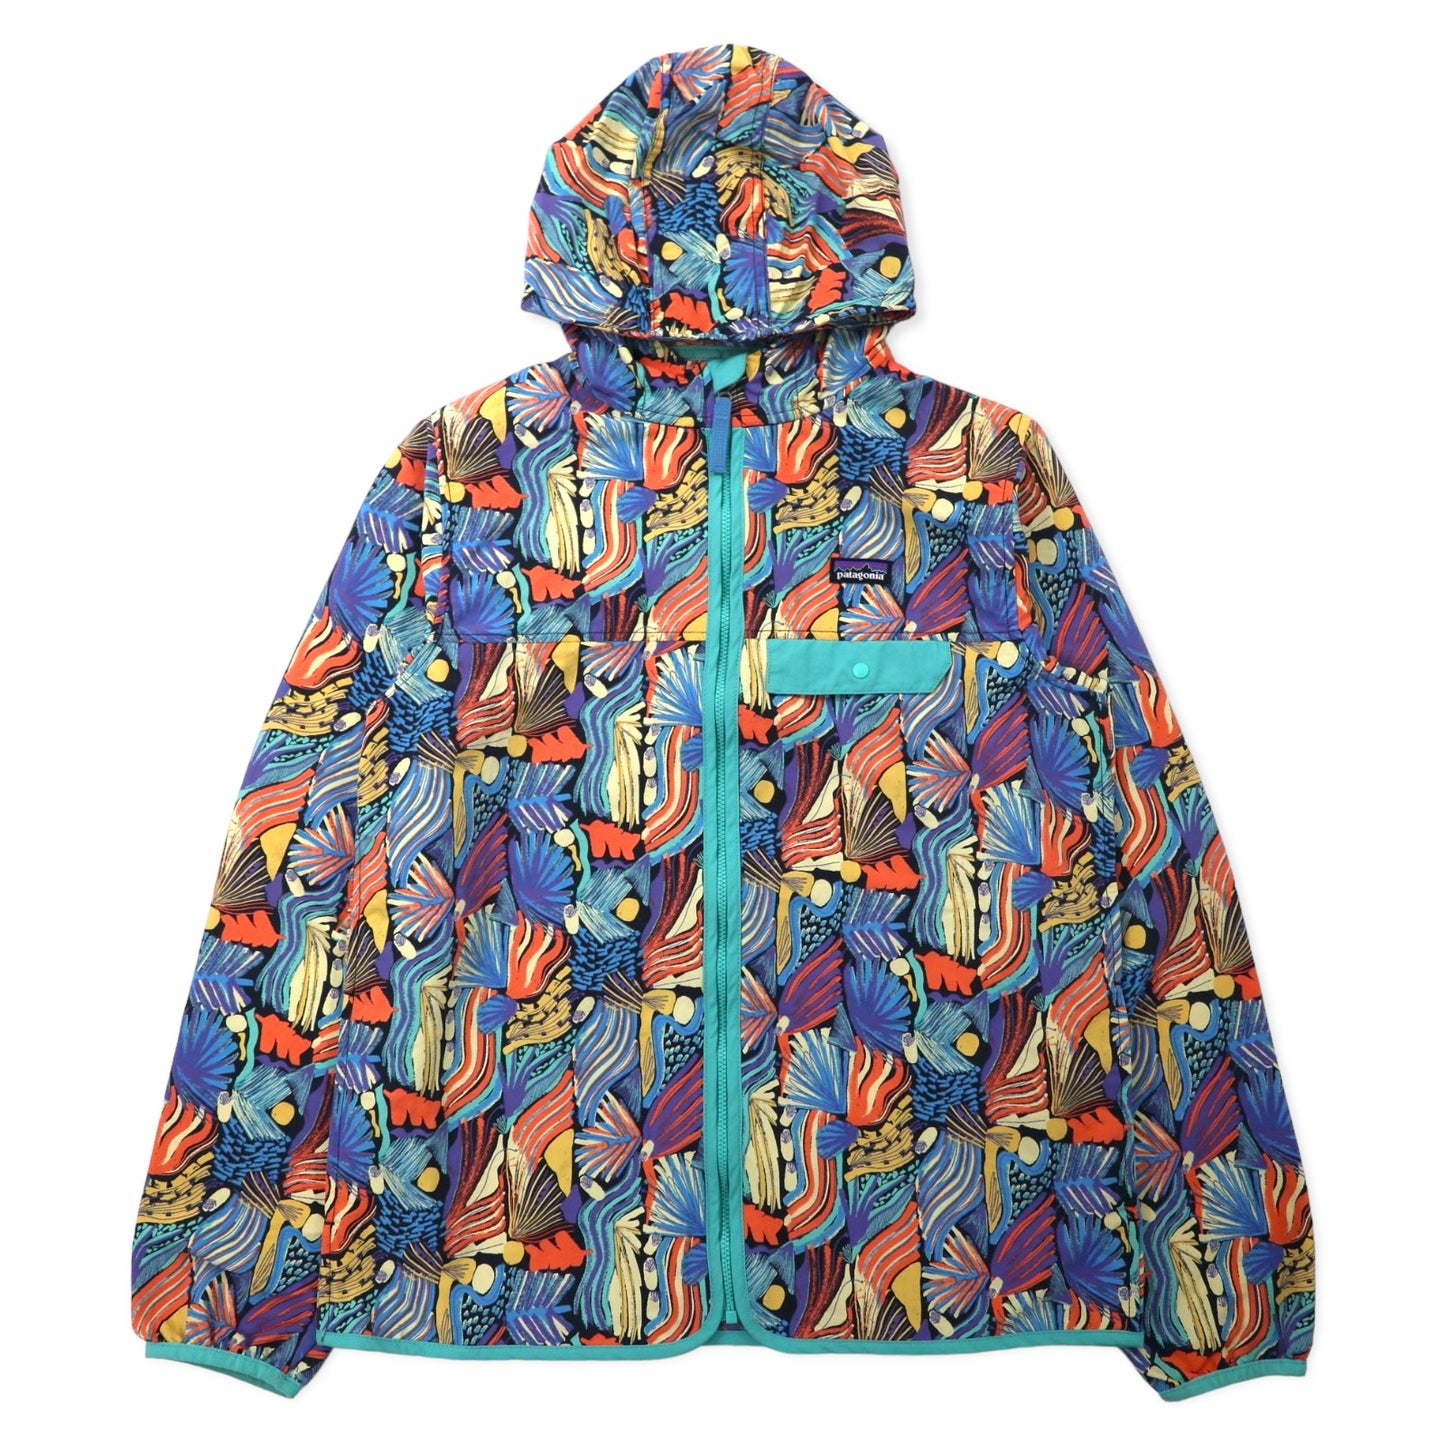 PATAGONIA Baggies Jacket Shell HOODIE XXL Multi Color Patterned Polyester  Water repellent 64233 – 日本然リトテ